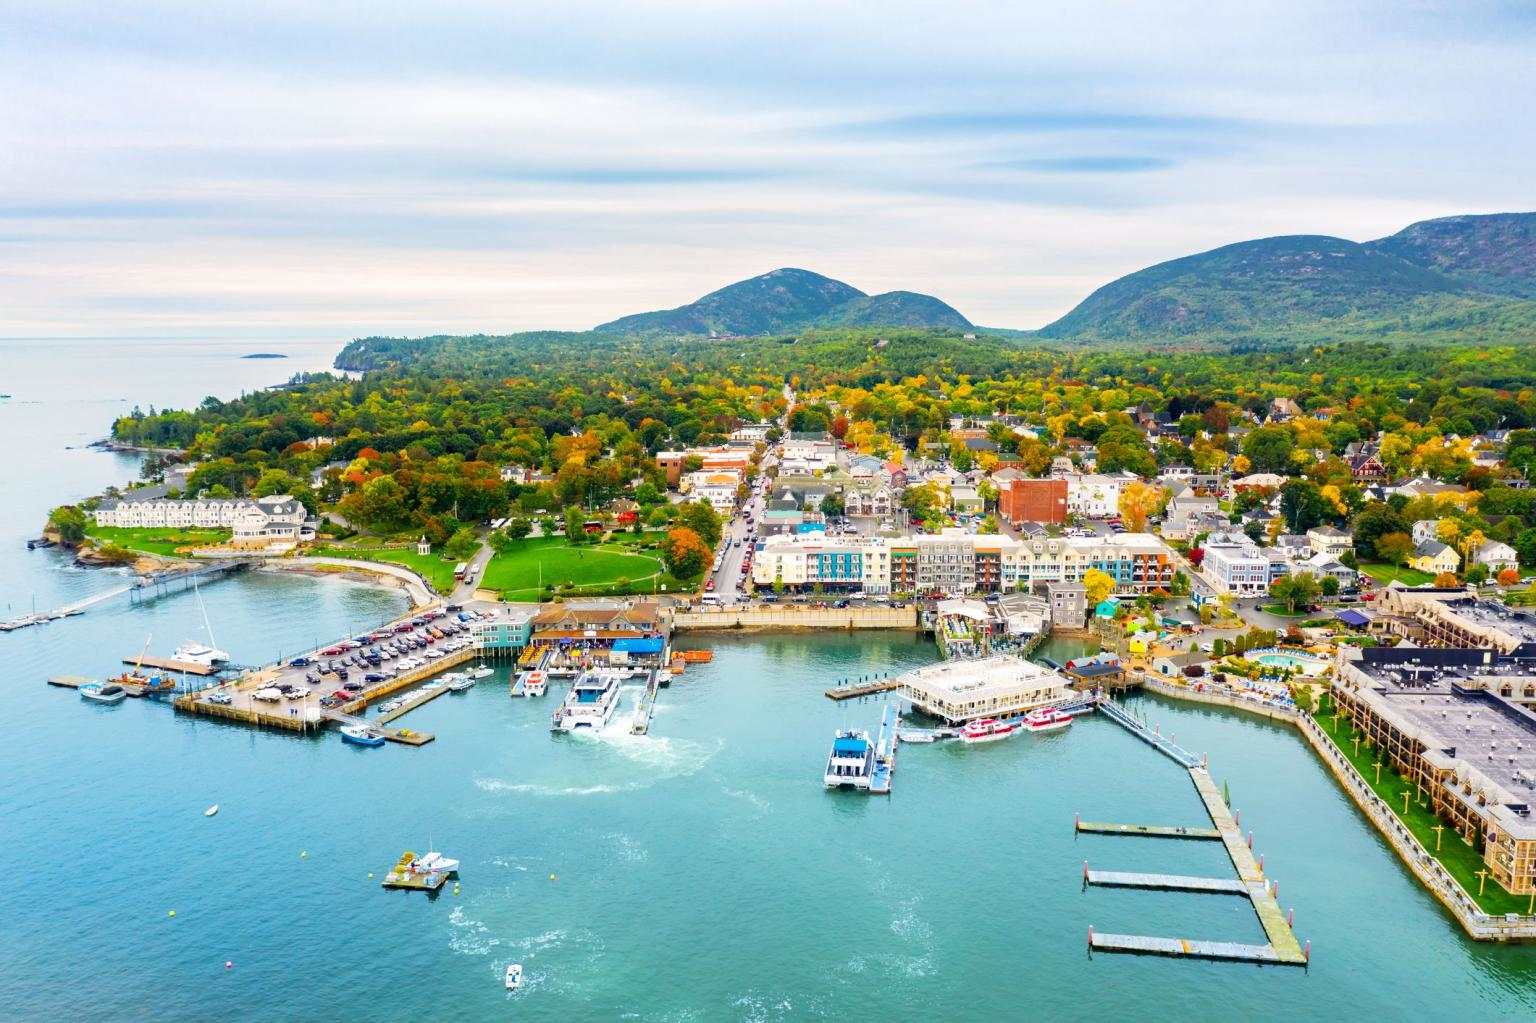 Bar Harbor successfully converts streetlights to LED